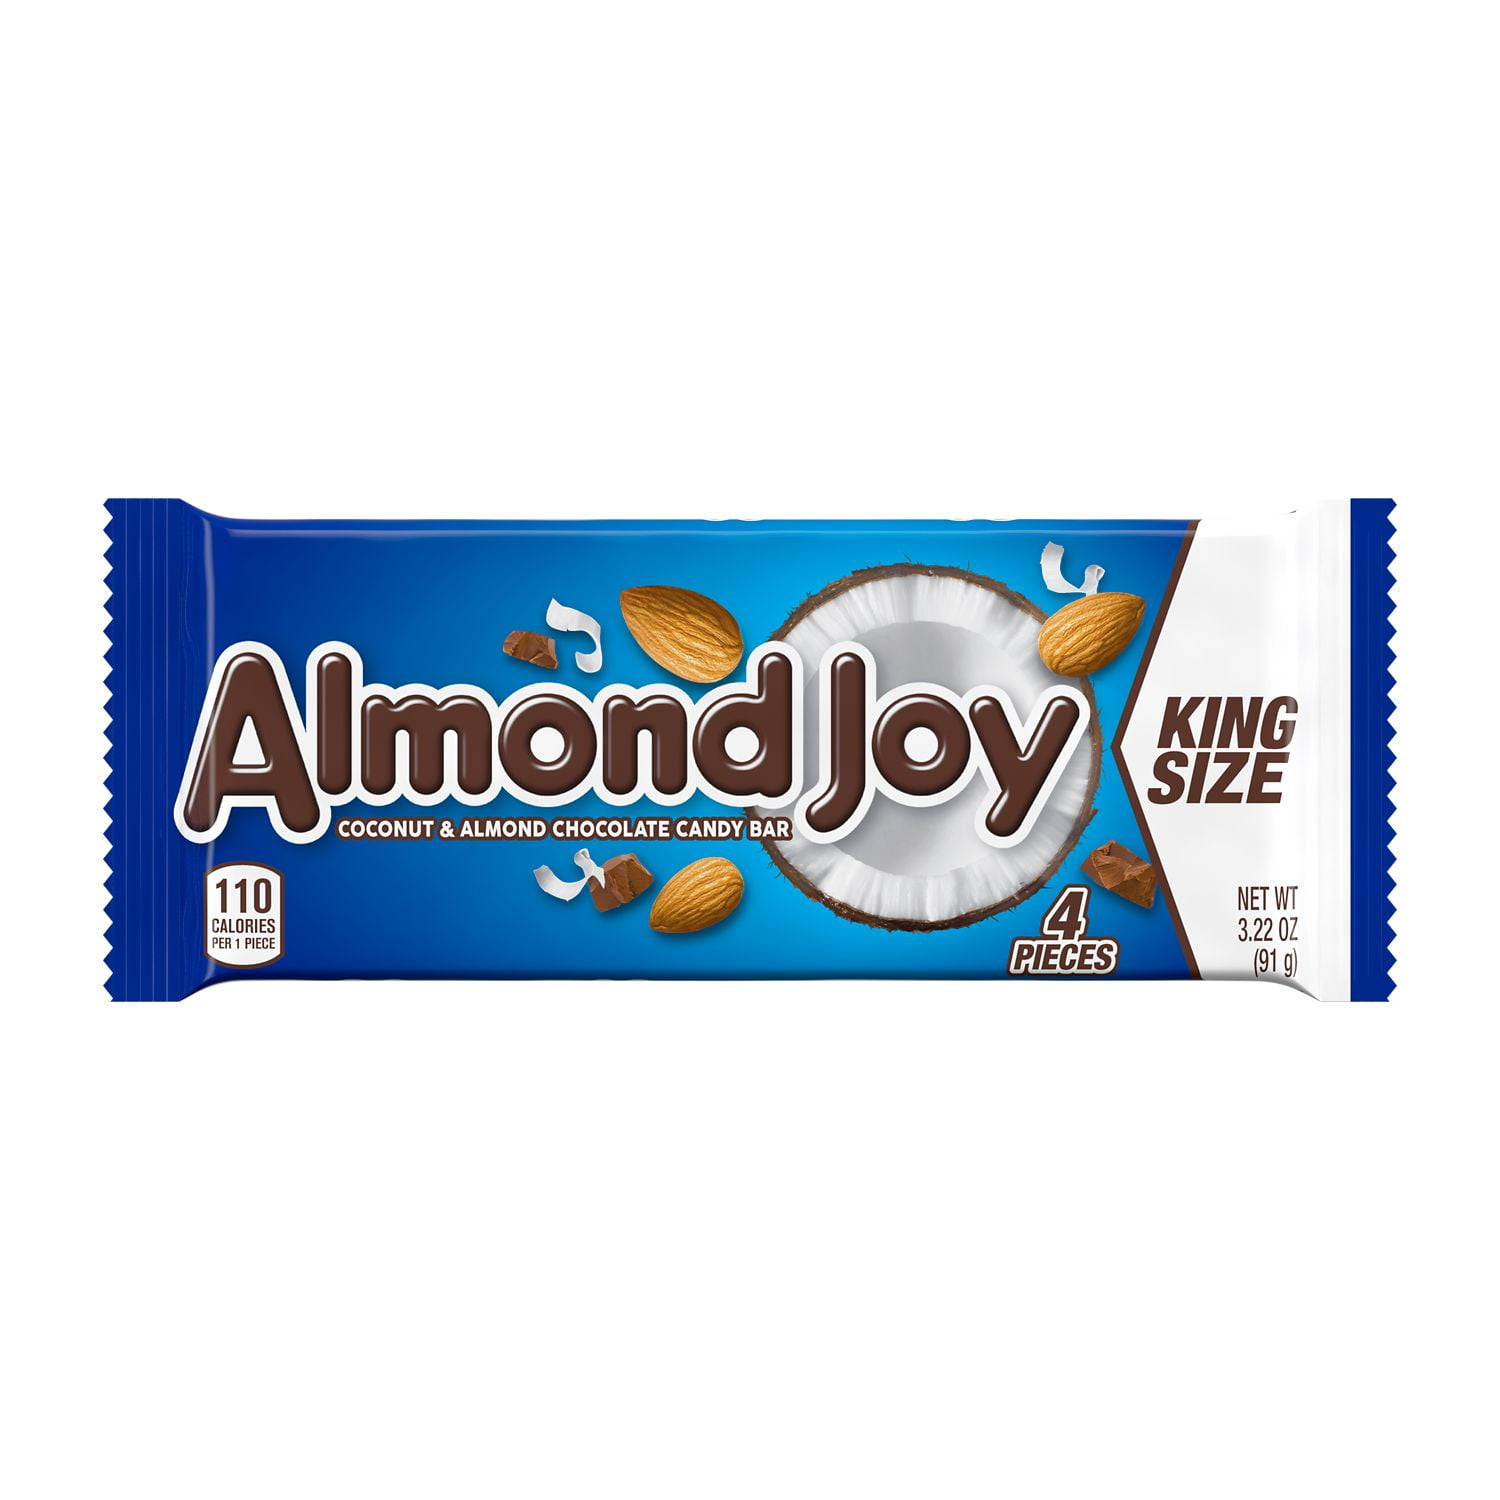 ALMOND JOY, Coconut and Almond Chocolate Candy Bars, Gluten Free, 3.22 oz, King Size Pack (4 Pieces)